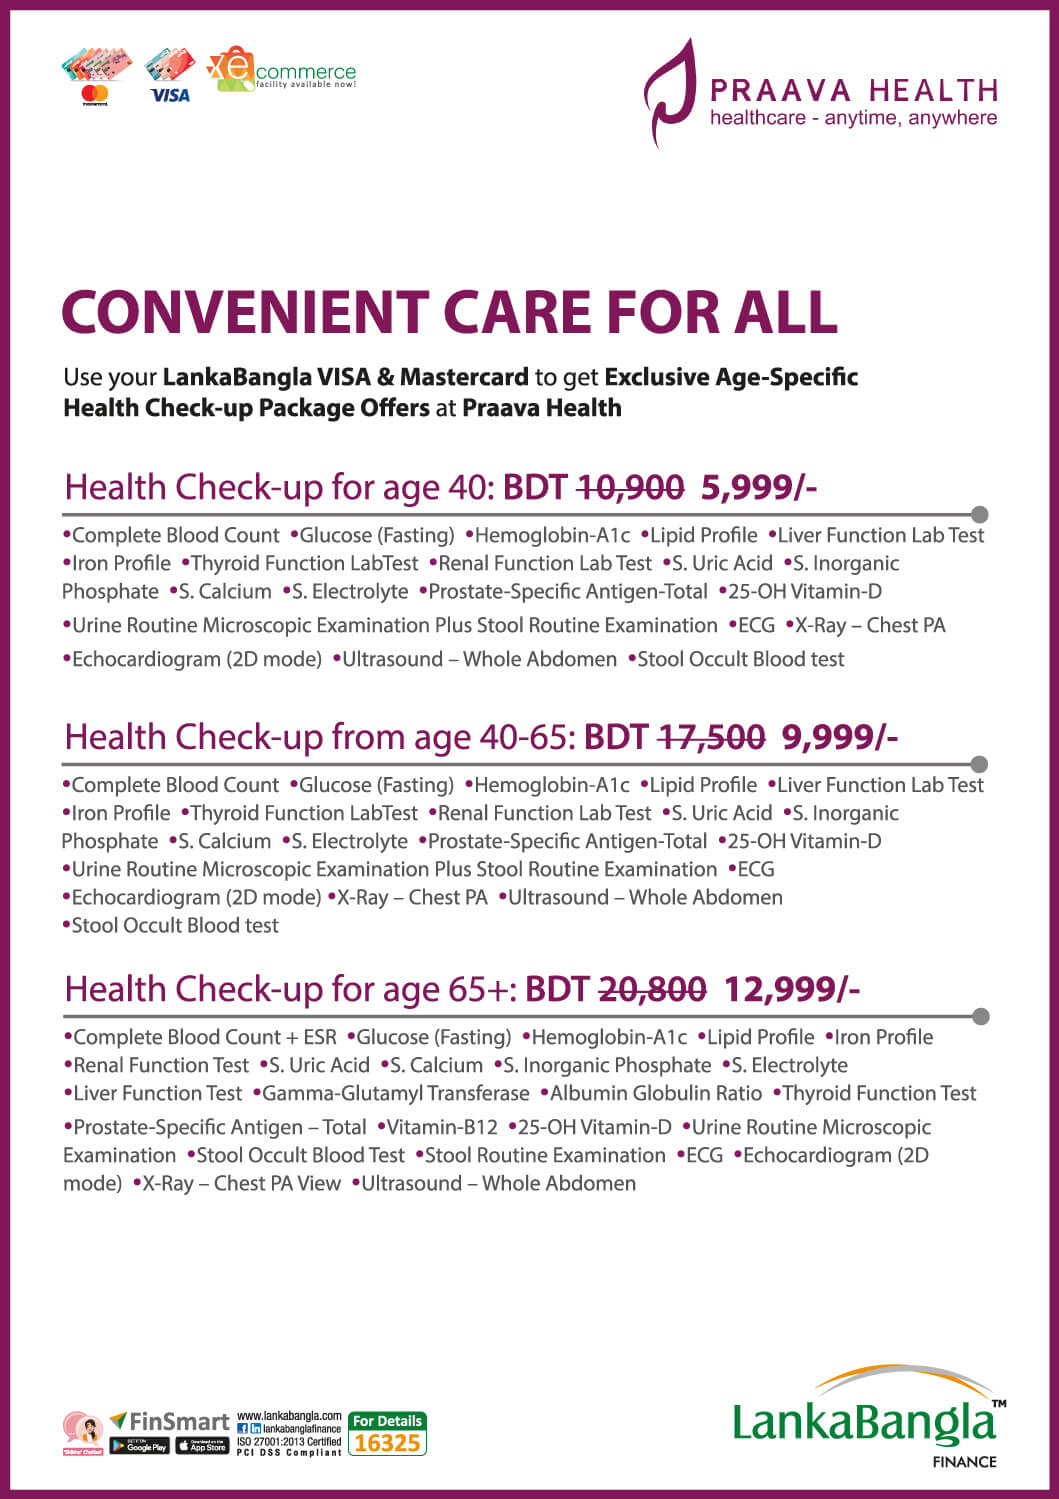 LBFL Exclusive Age Specific Health Checkup Package Offer (Tariff Card) at Praava Health